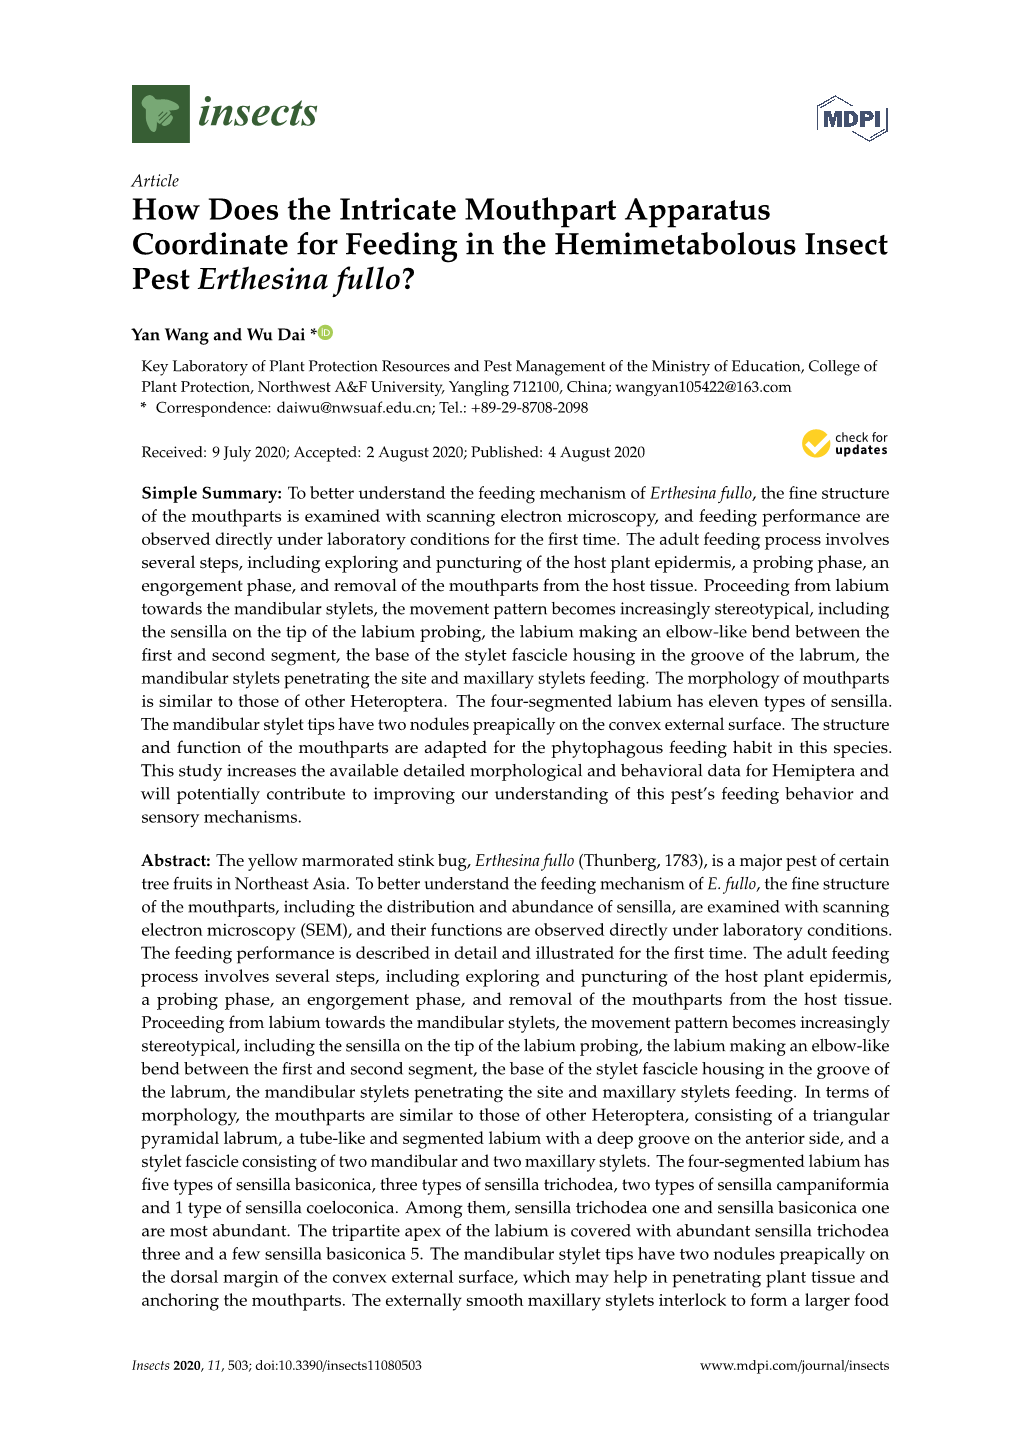 How Does the Intricate Mouthpart Apparatus Coordinate for Feeding in the Hemimetabolous Insect Pest Erthesina Fullo?